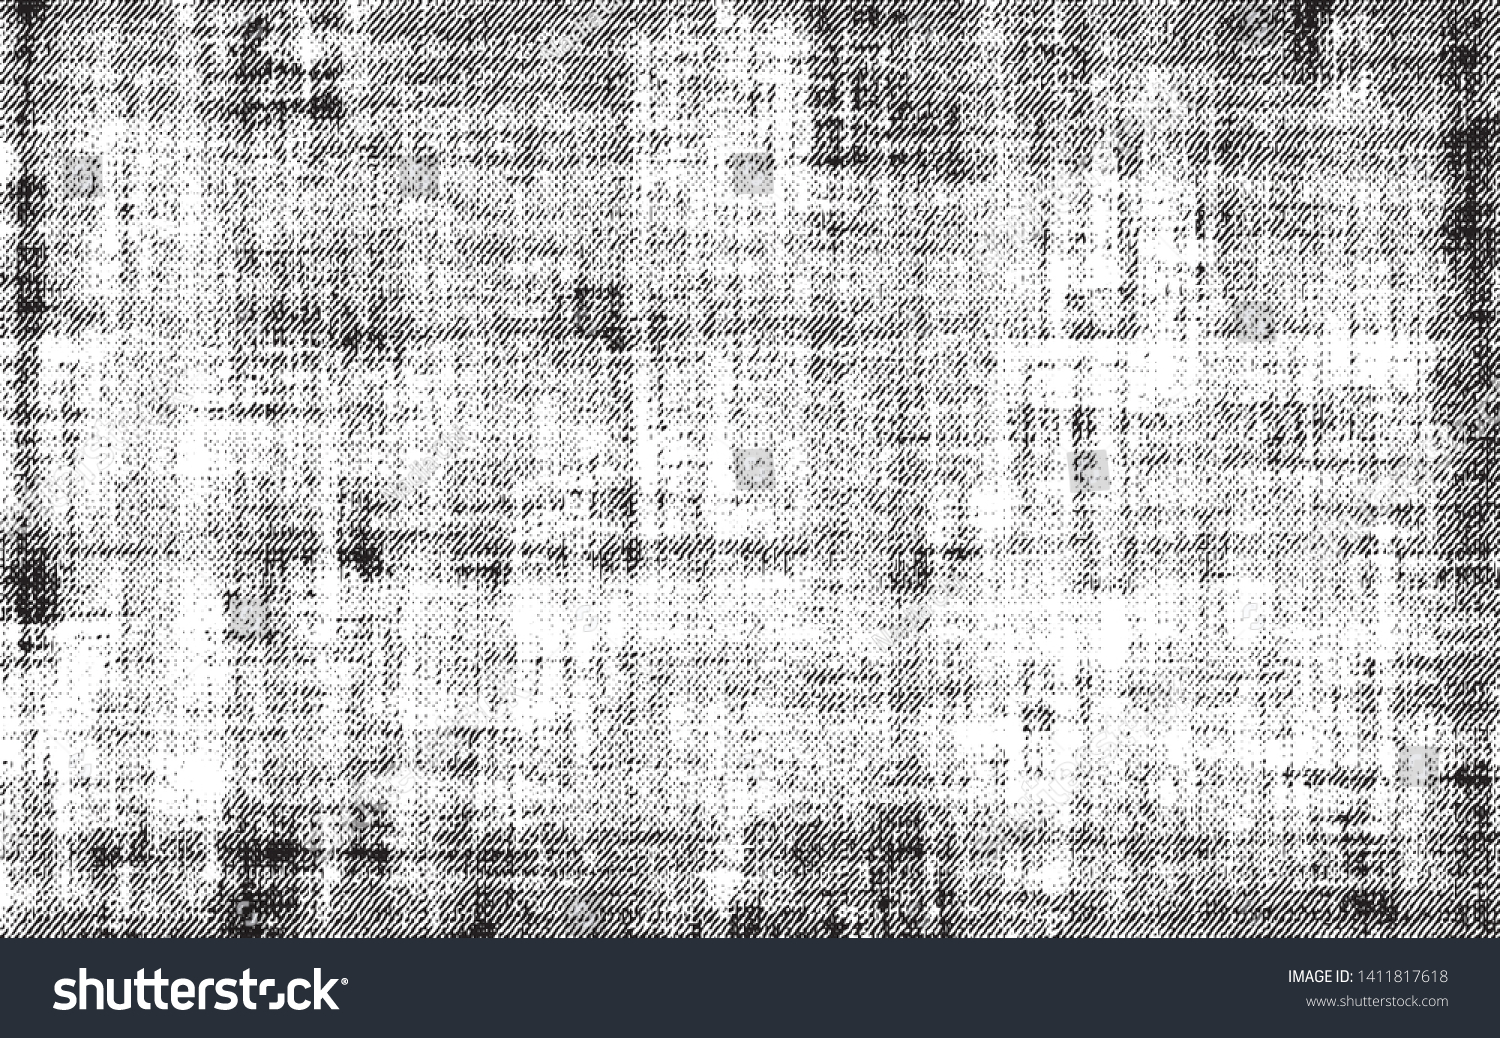 Vector Fabric Texture Distressed Texture Weaving Stock Vector (Royalty ...